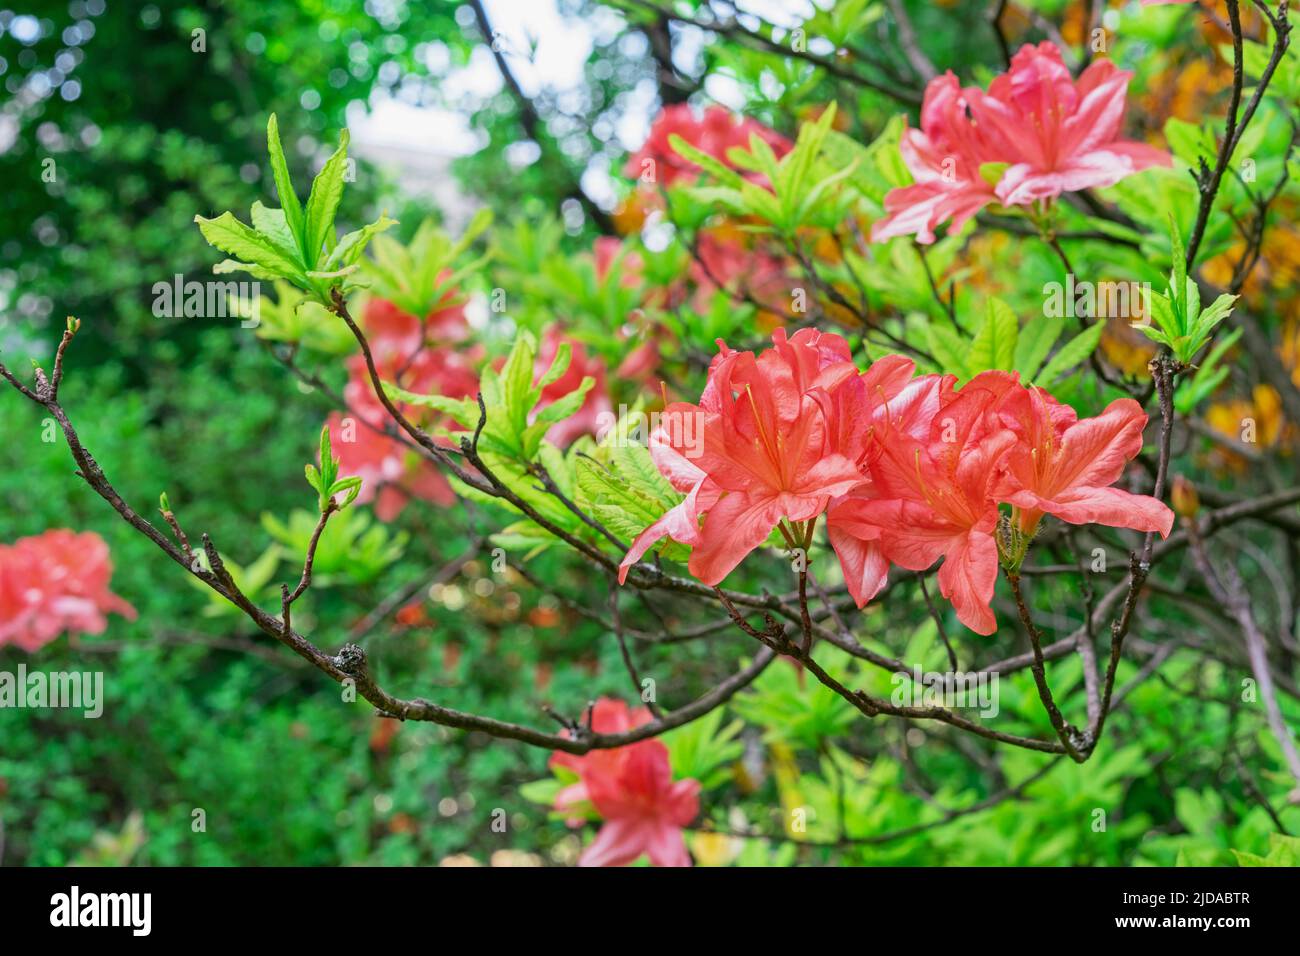 Scarlet rhododendrons in the summer garden. Pacific rhododendron. Red California rhododendron. Stock Photo